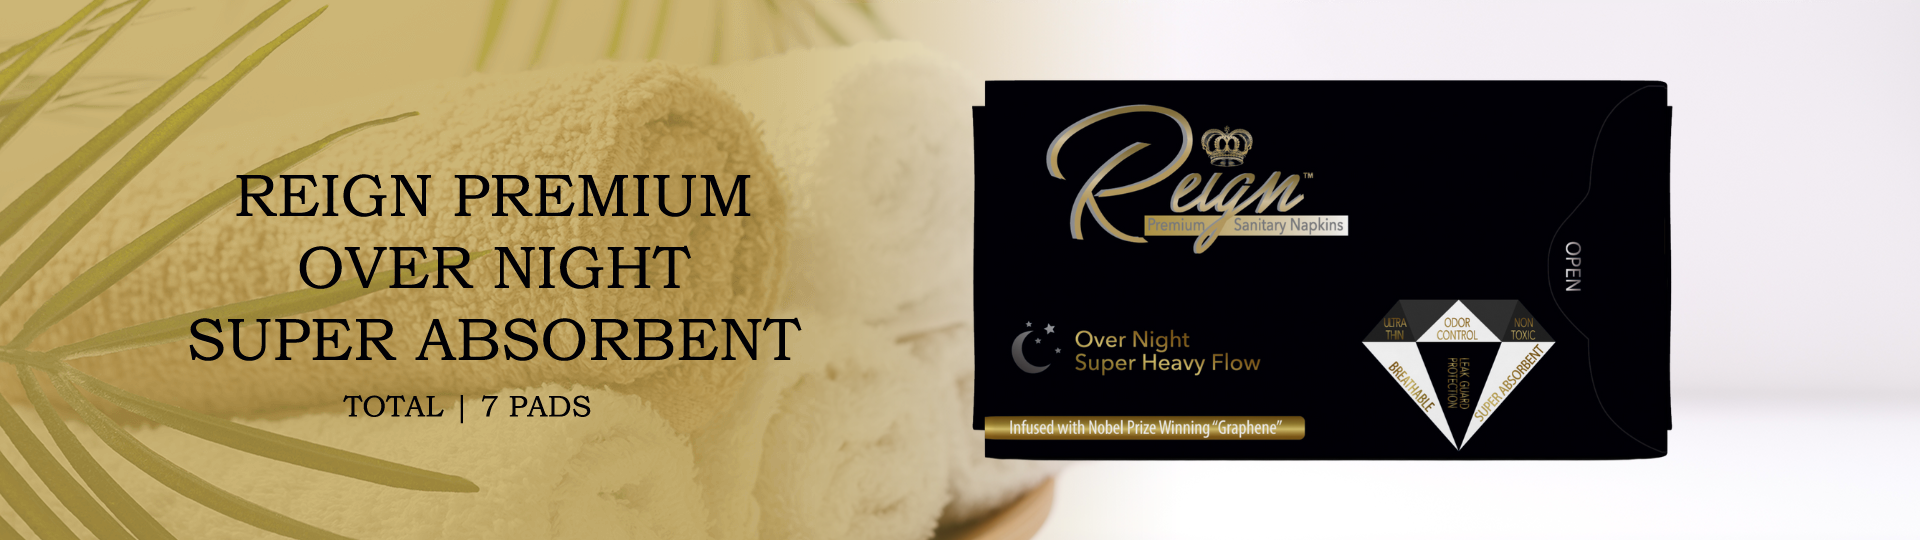 reign-pads-night-towels-gold-header-1920x540